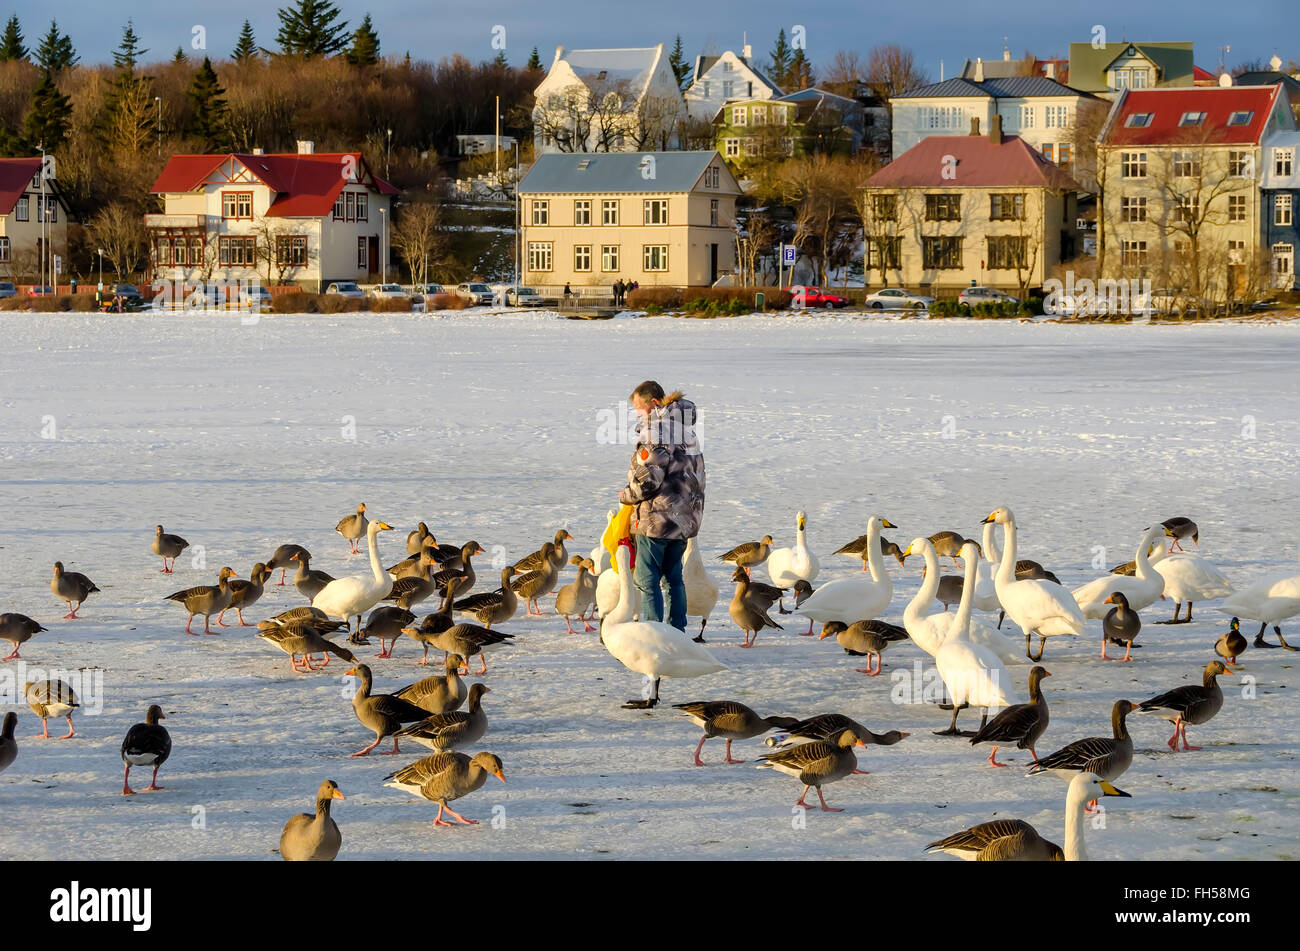 Lake Tjörnin or 'the pond” man feeds ducks and geese on frozen lake in winter, central Reykjavik, Iceland. Stock Photo